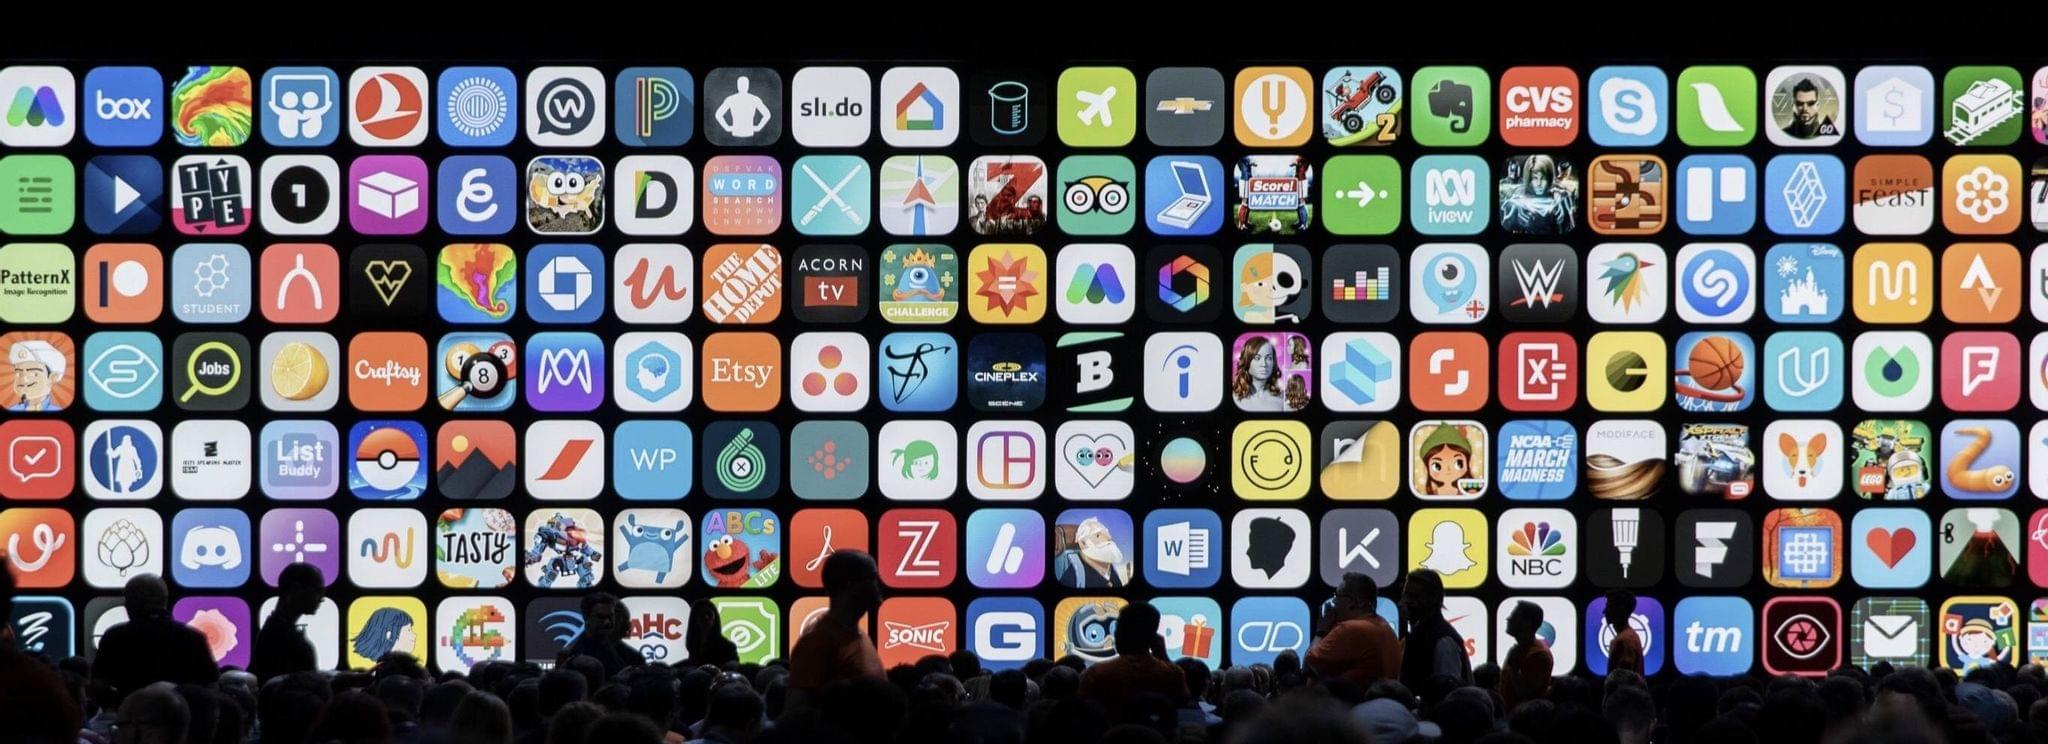 Many of these apps are already gone.